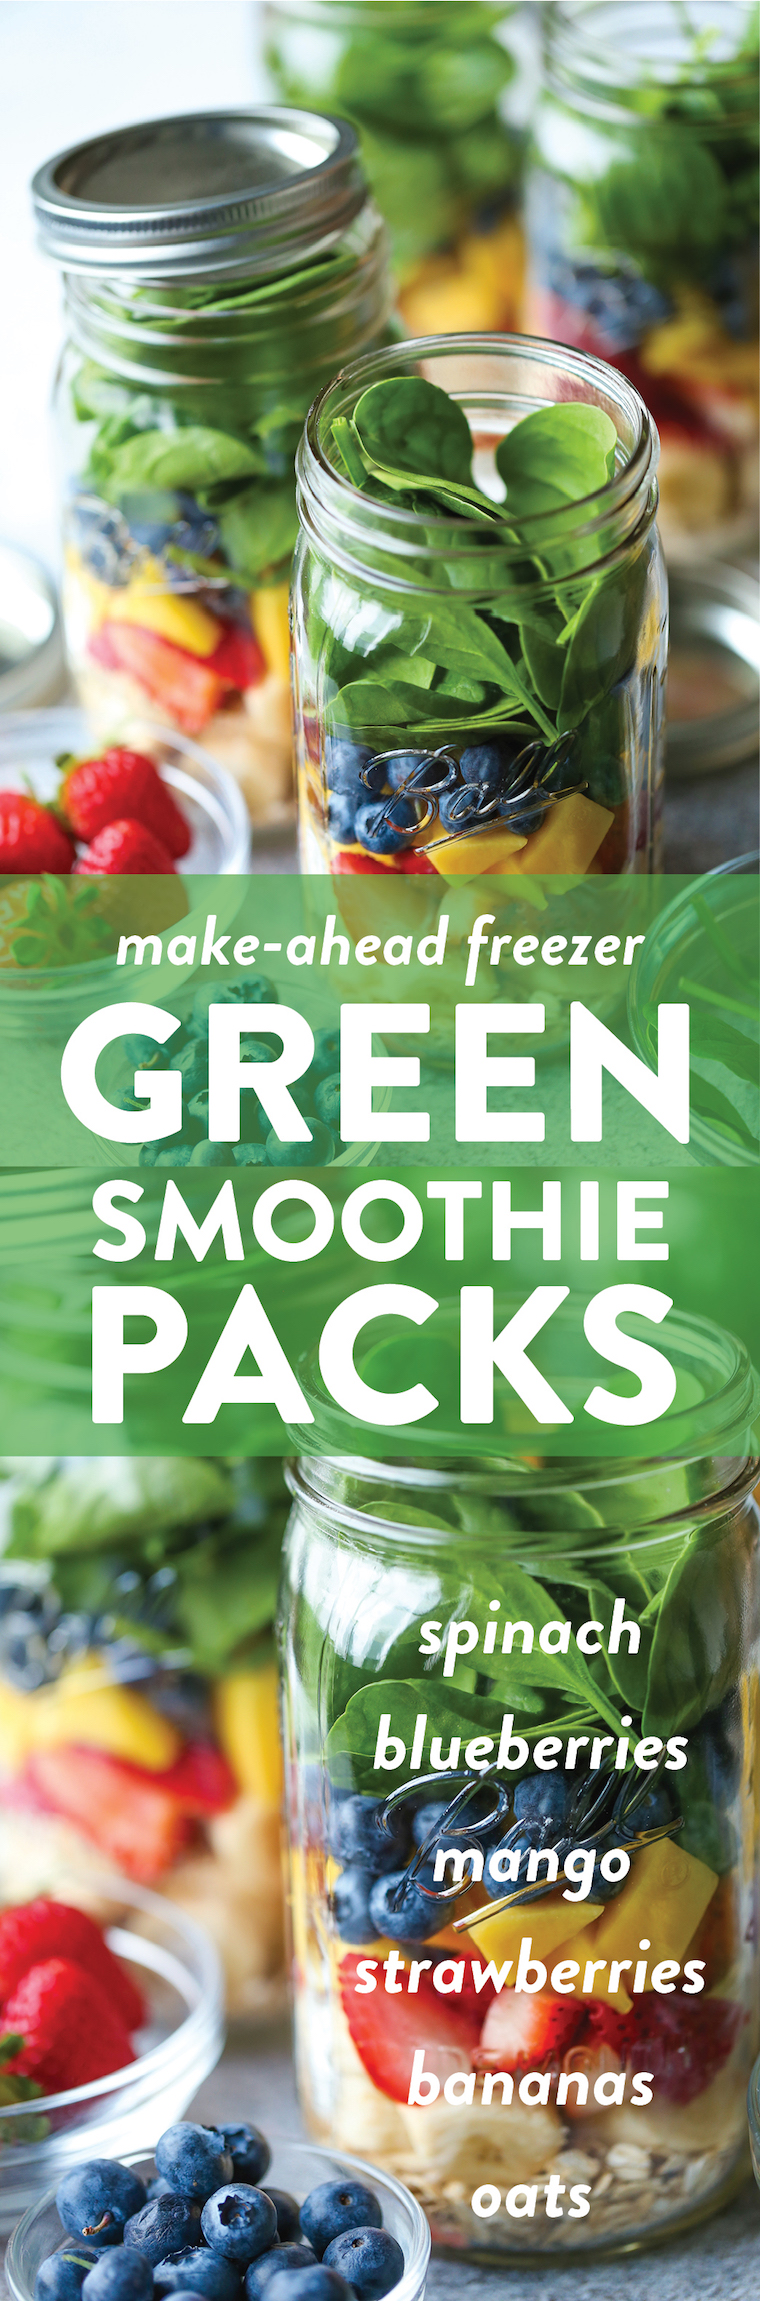 Freezer Green Smoothie Packs - Make-ahead freezer-packs! Now you have ready-made smoothies for the entire week. Simply add your milk and blend! That's it!